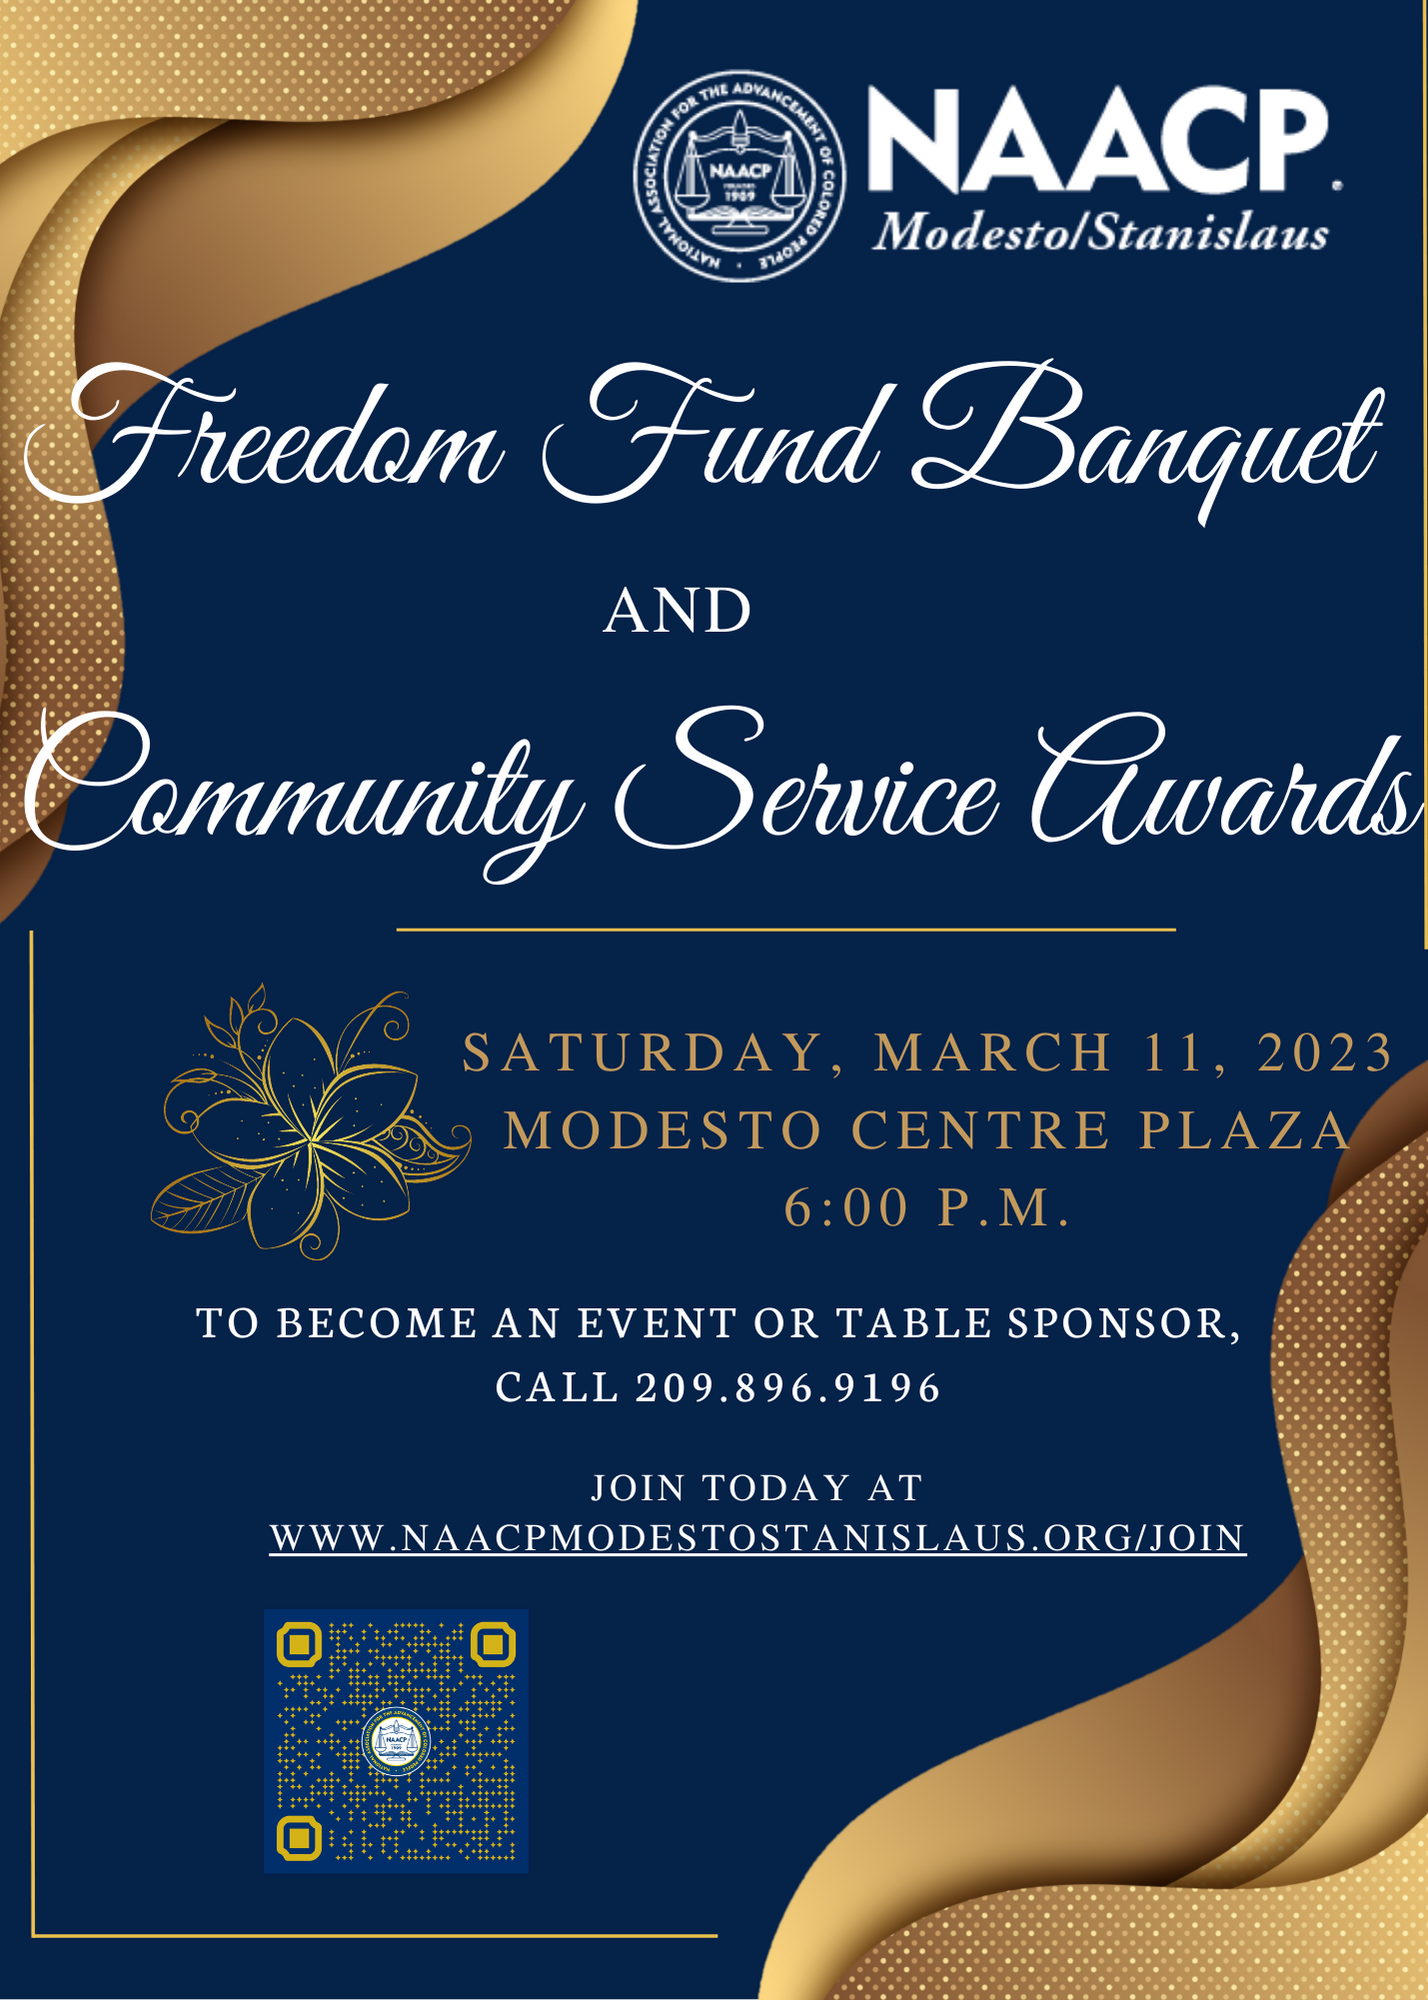 NAACP Freedom Fund Banquet & Community Service Awards